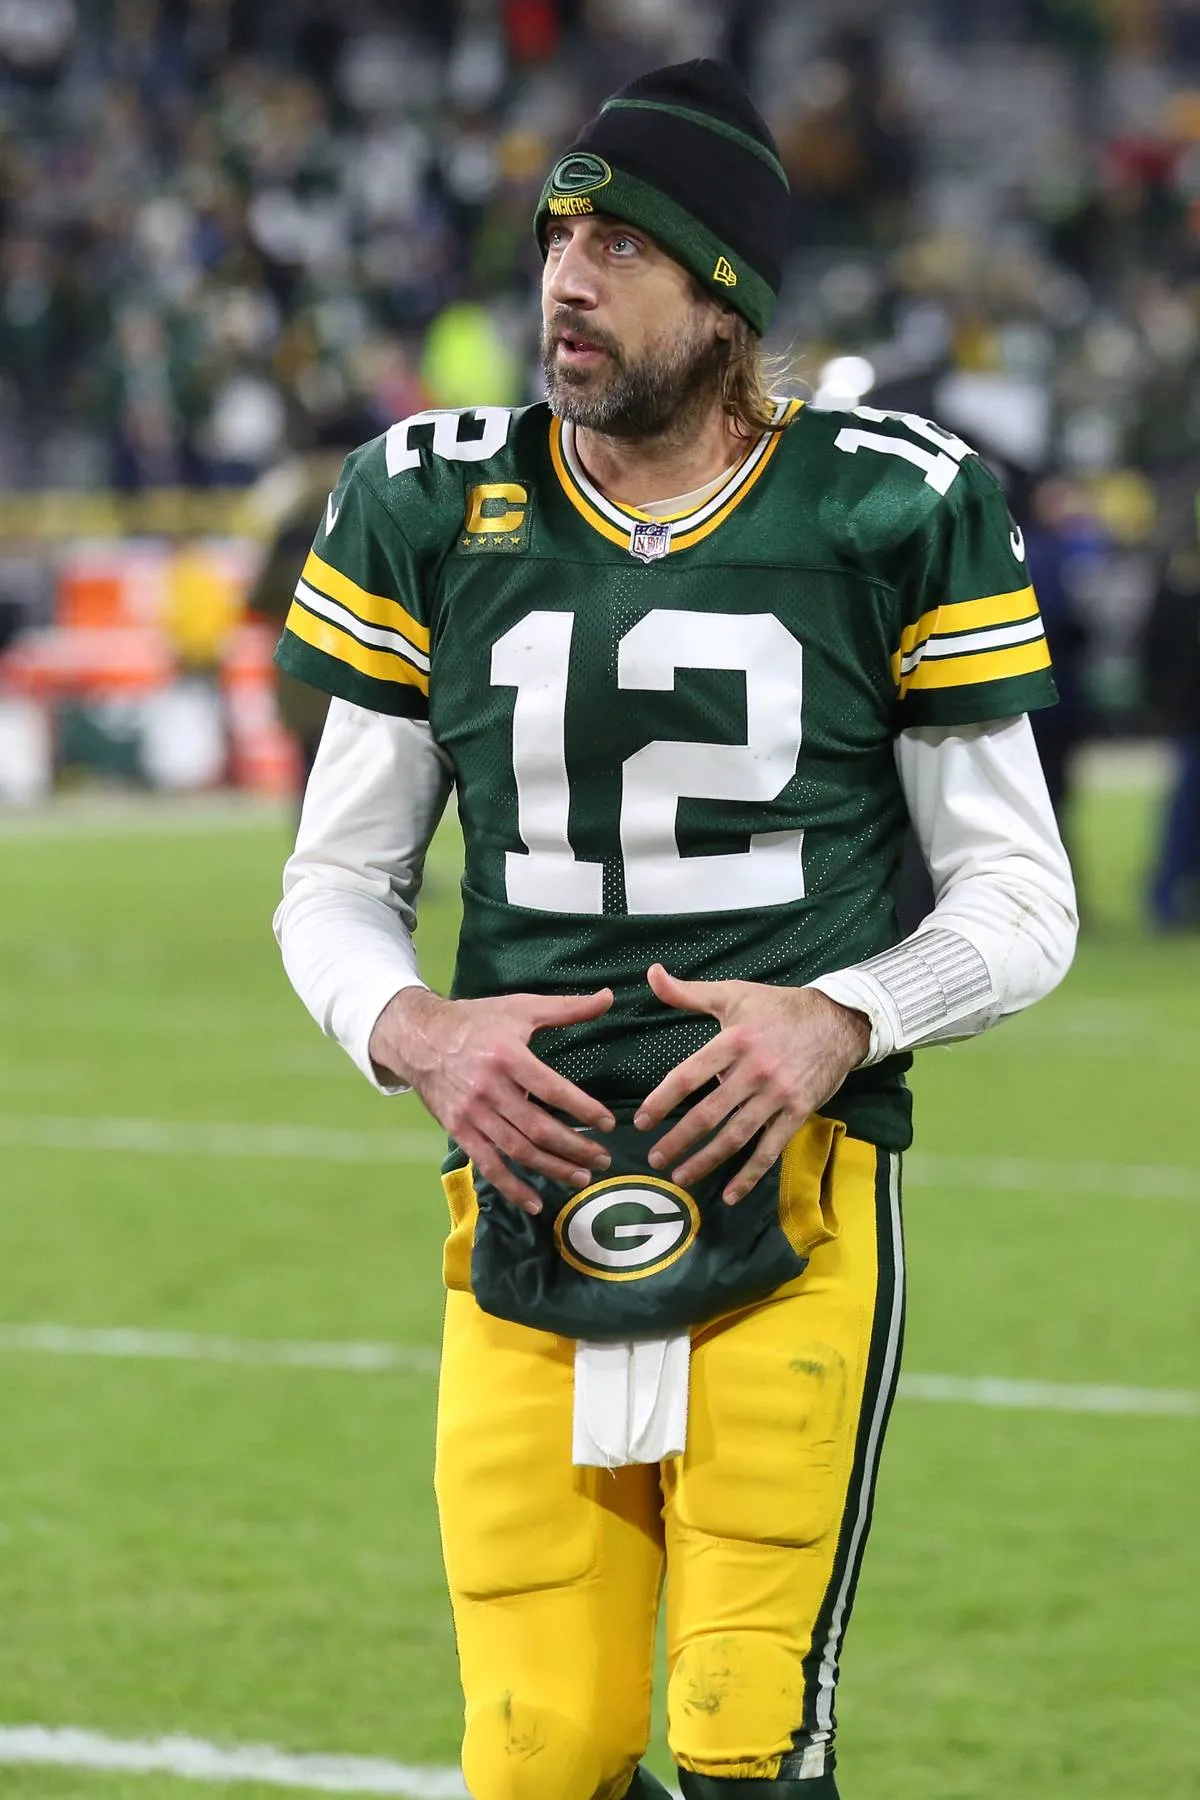 NFL: DEC 12 Bears at Packers